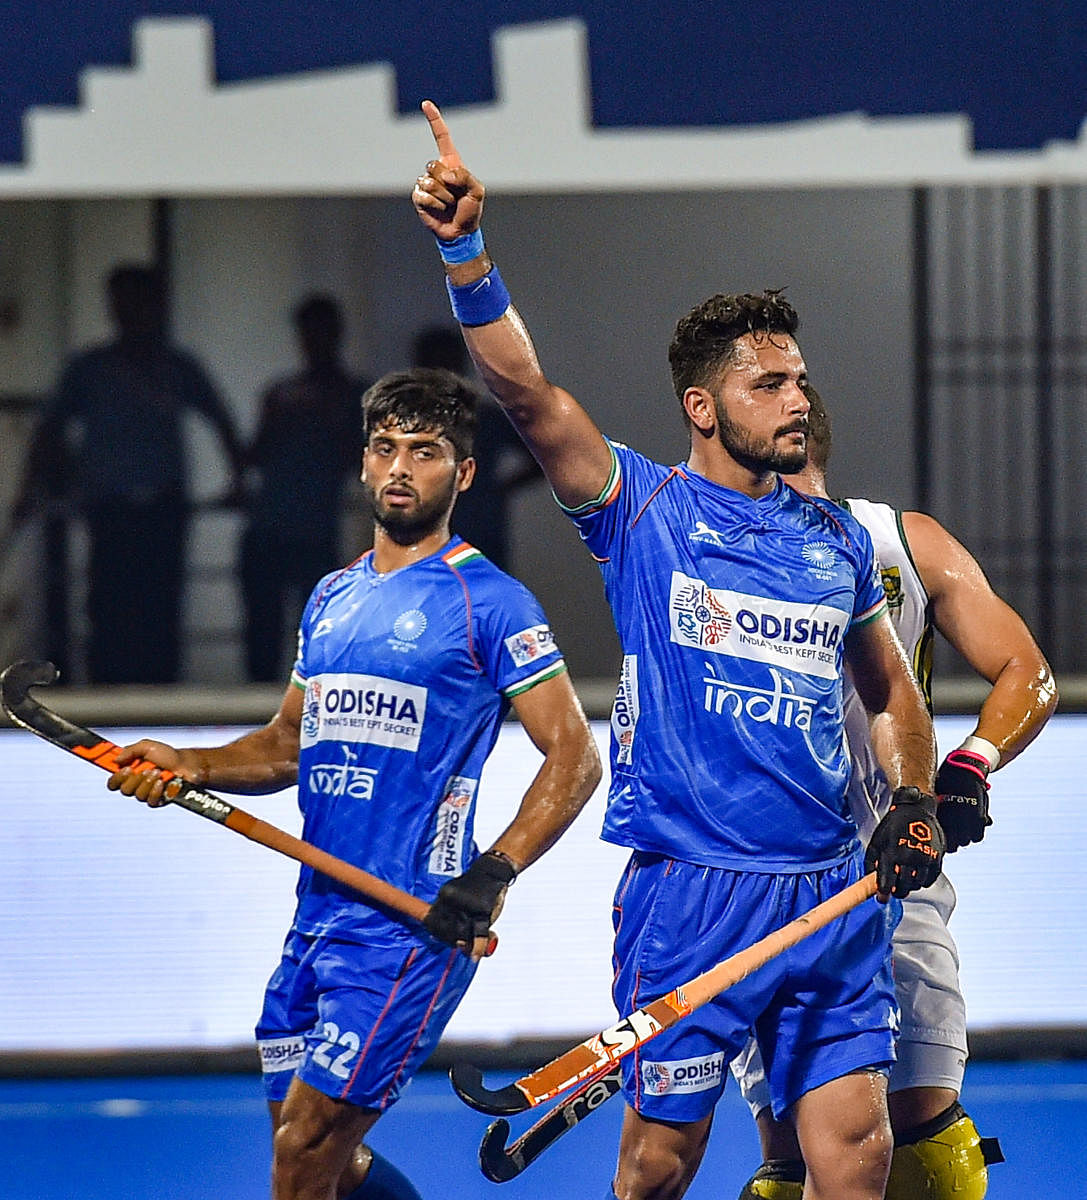 CLINICAL: India's Harmanpreet Singh (right) celebrates after scoring a goal against South Africa during the title clash of the FIH Series Finals in Bhubaneswar on Saturday. PTI  